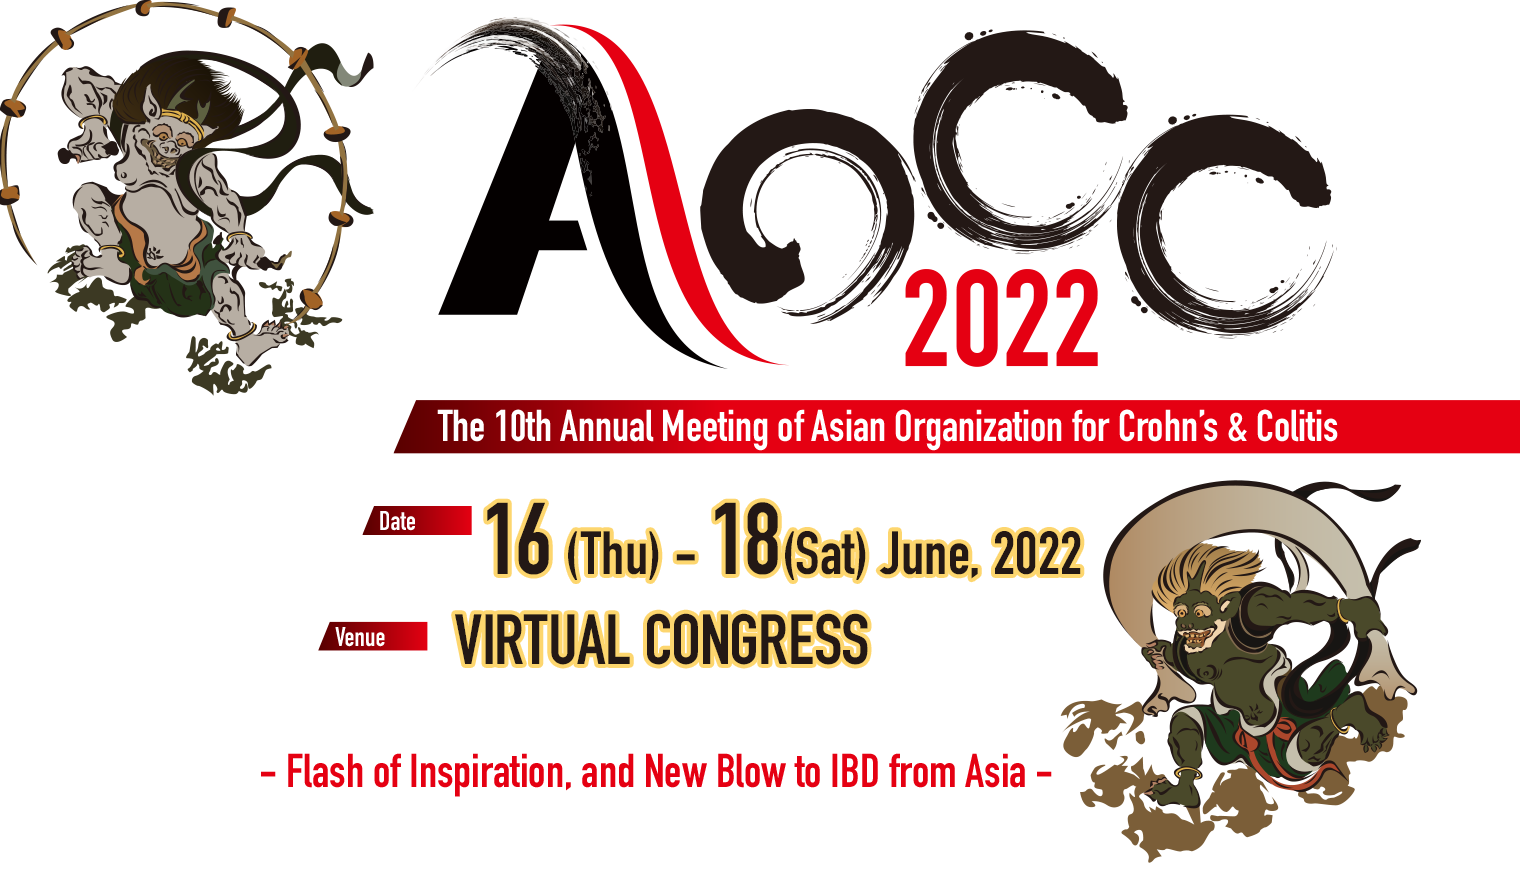 The 10th Annual Meeting of Asian Organization for Crohn’s & Colitis | Date: 16Fri - 18Sat June 2022 | Venue: VIRTUAL CONGRESS | Theme: - Flash of Inspiration, and New Blow to IBD from Asia -